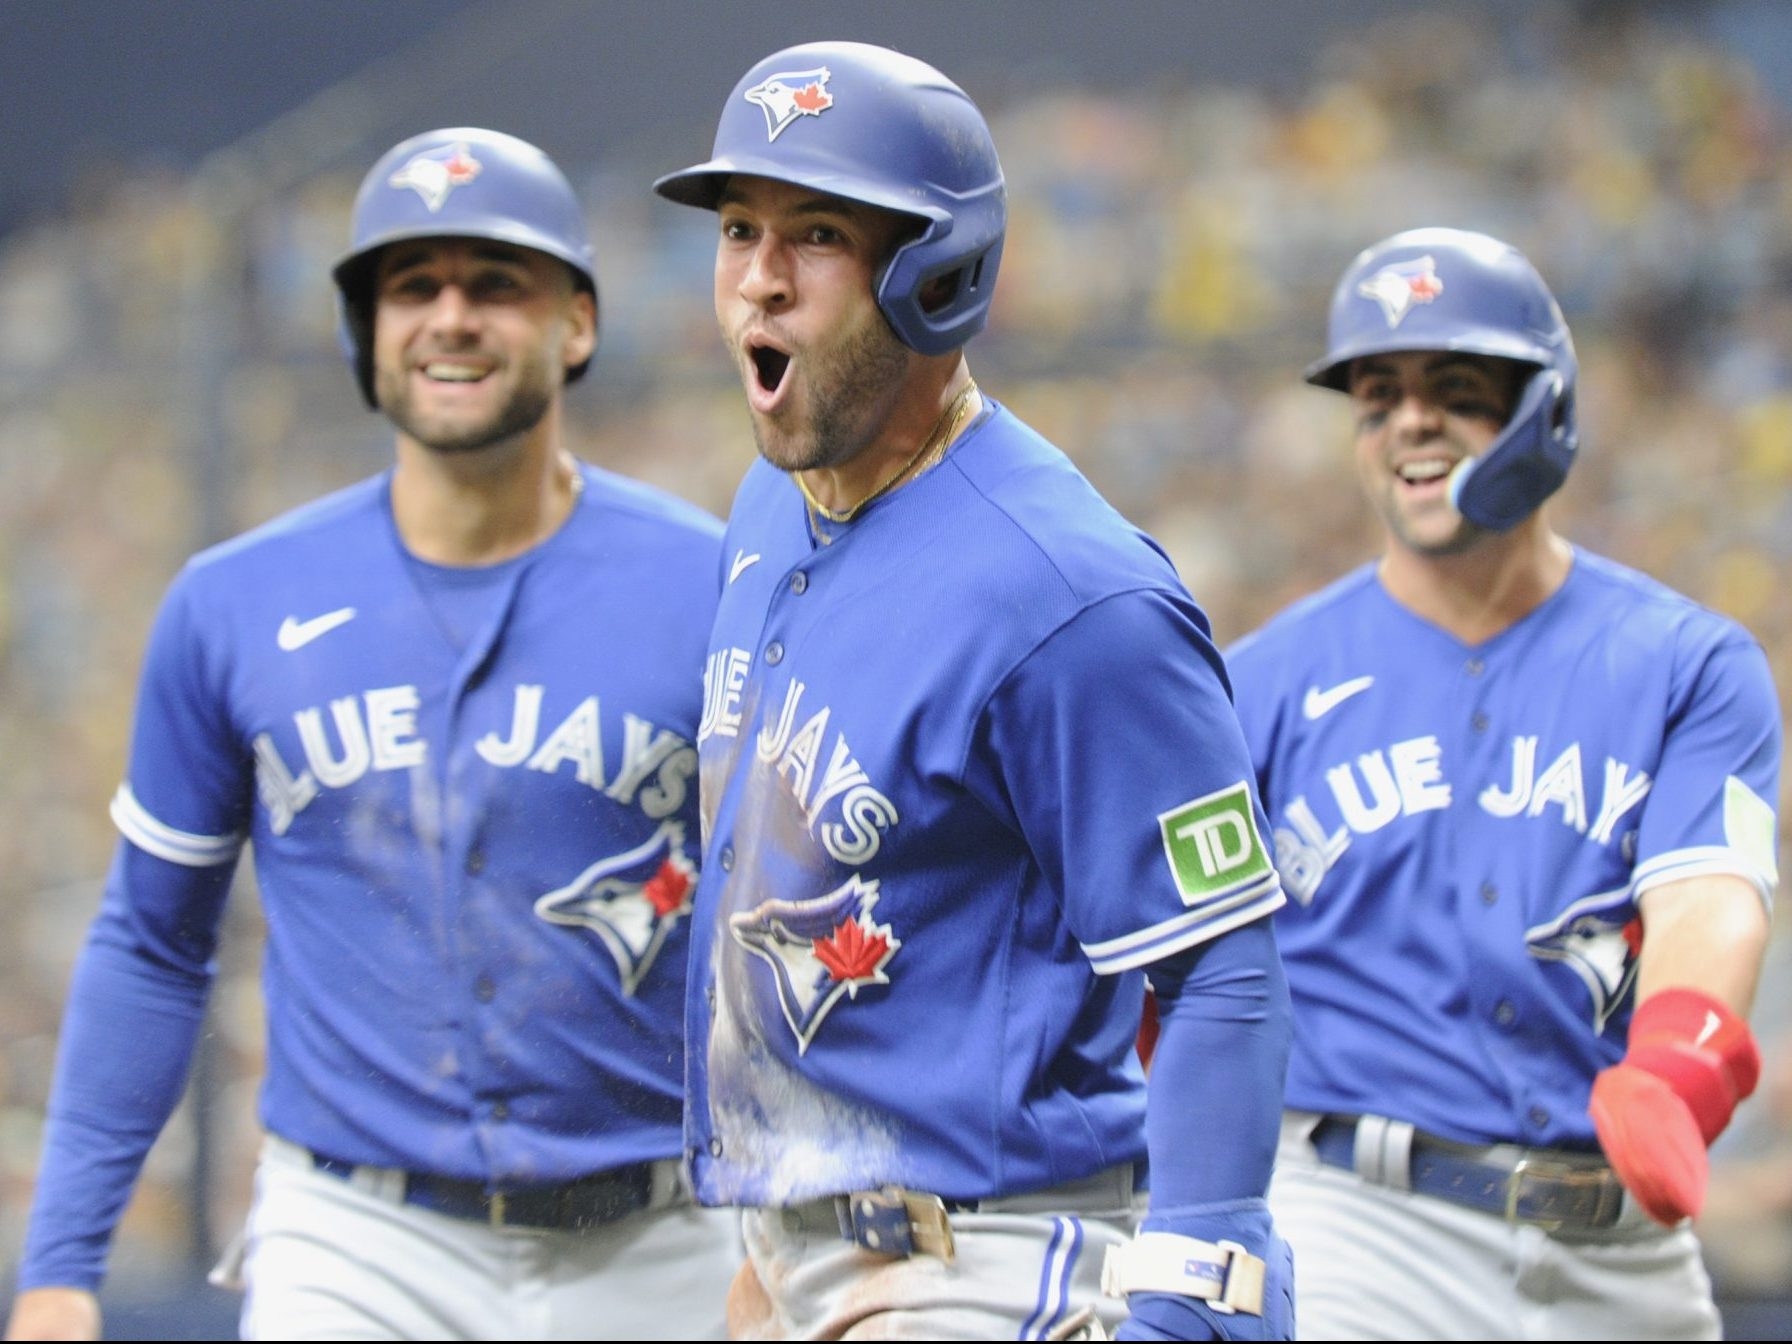 Blue Jays-Twins preview: Who's got the edge? Who's going to win?